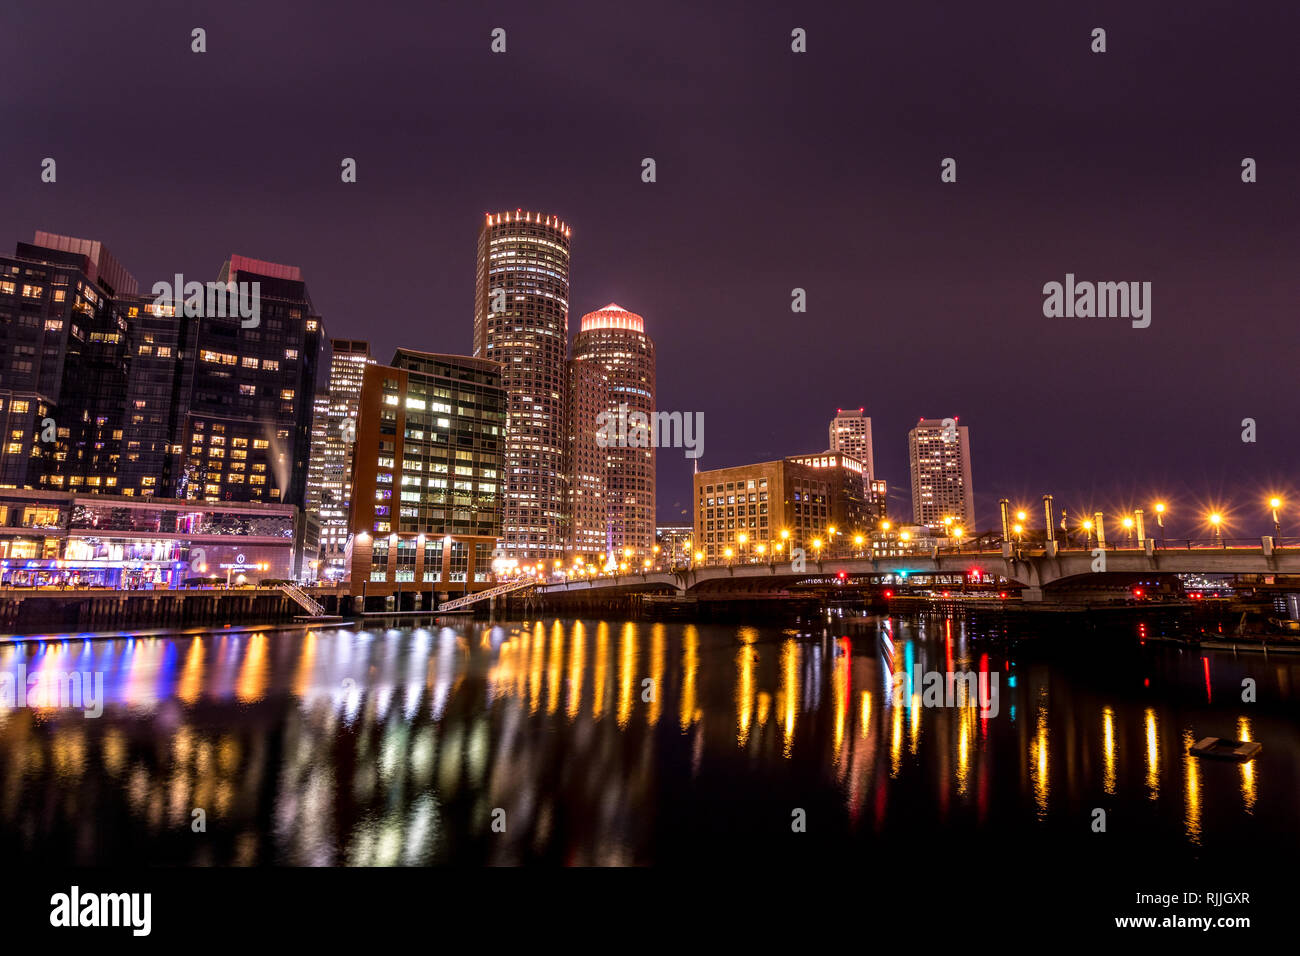 Night time view of Boston from across the Fort Point Channel taken with long exposure to high-lite the reflections in the water. Stock Photo